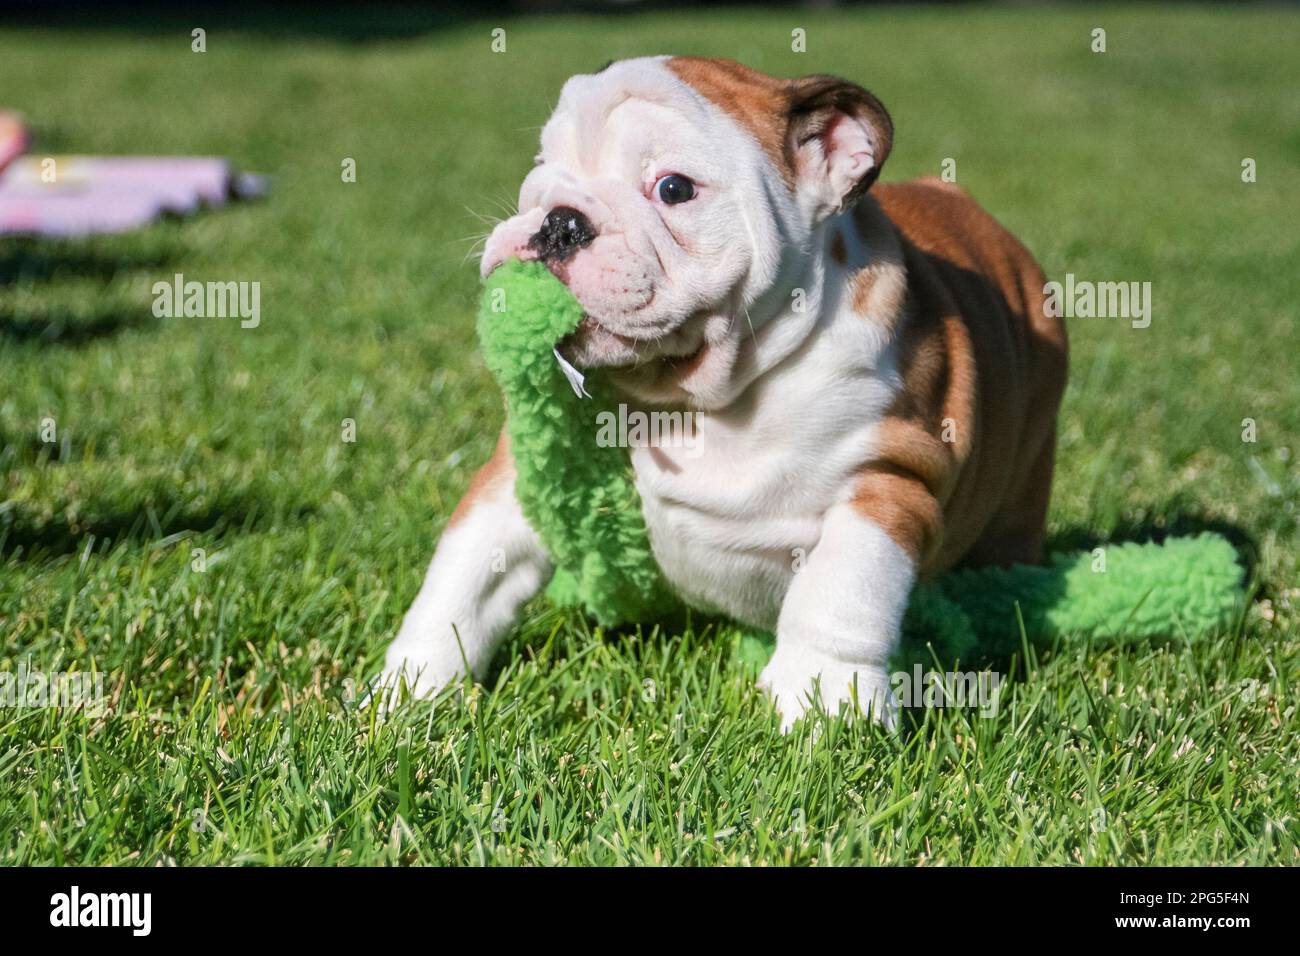 Bulldog puppy with a green toy on the lawn Stock Photo